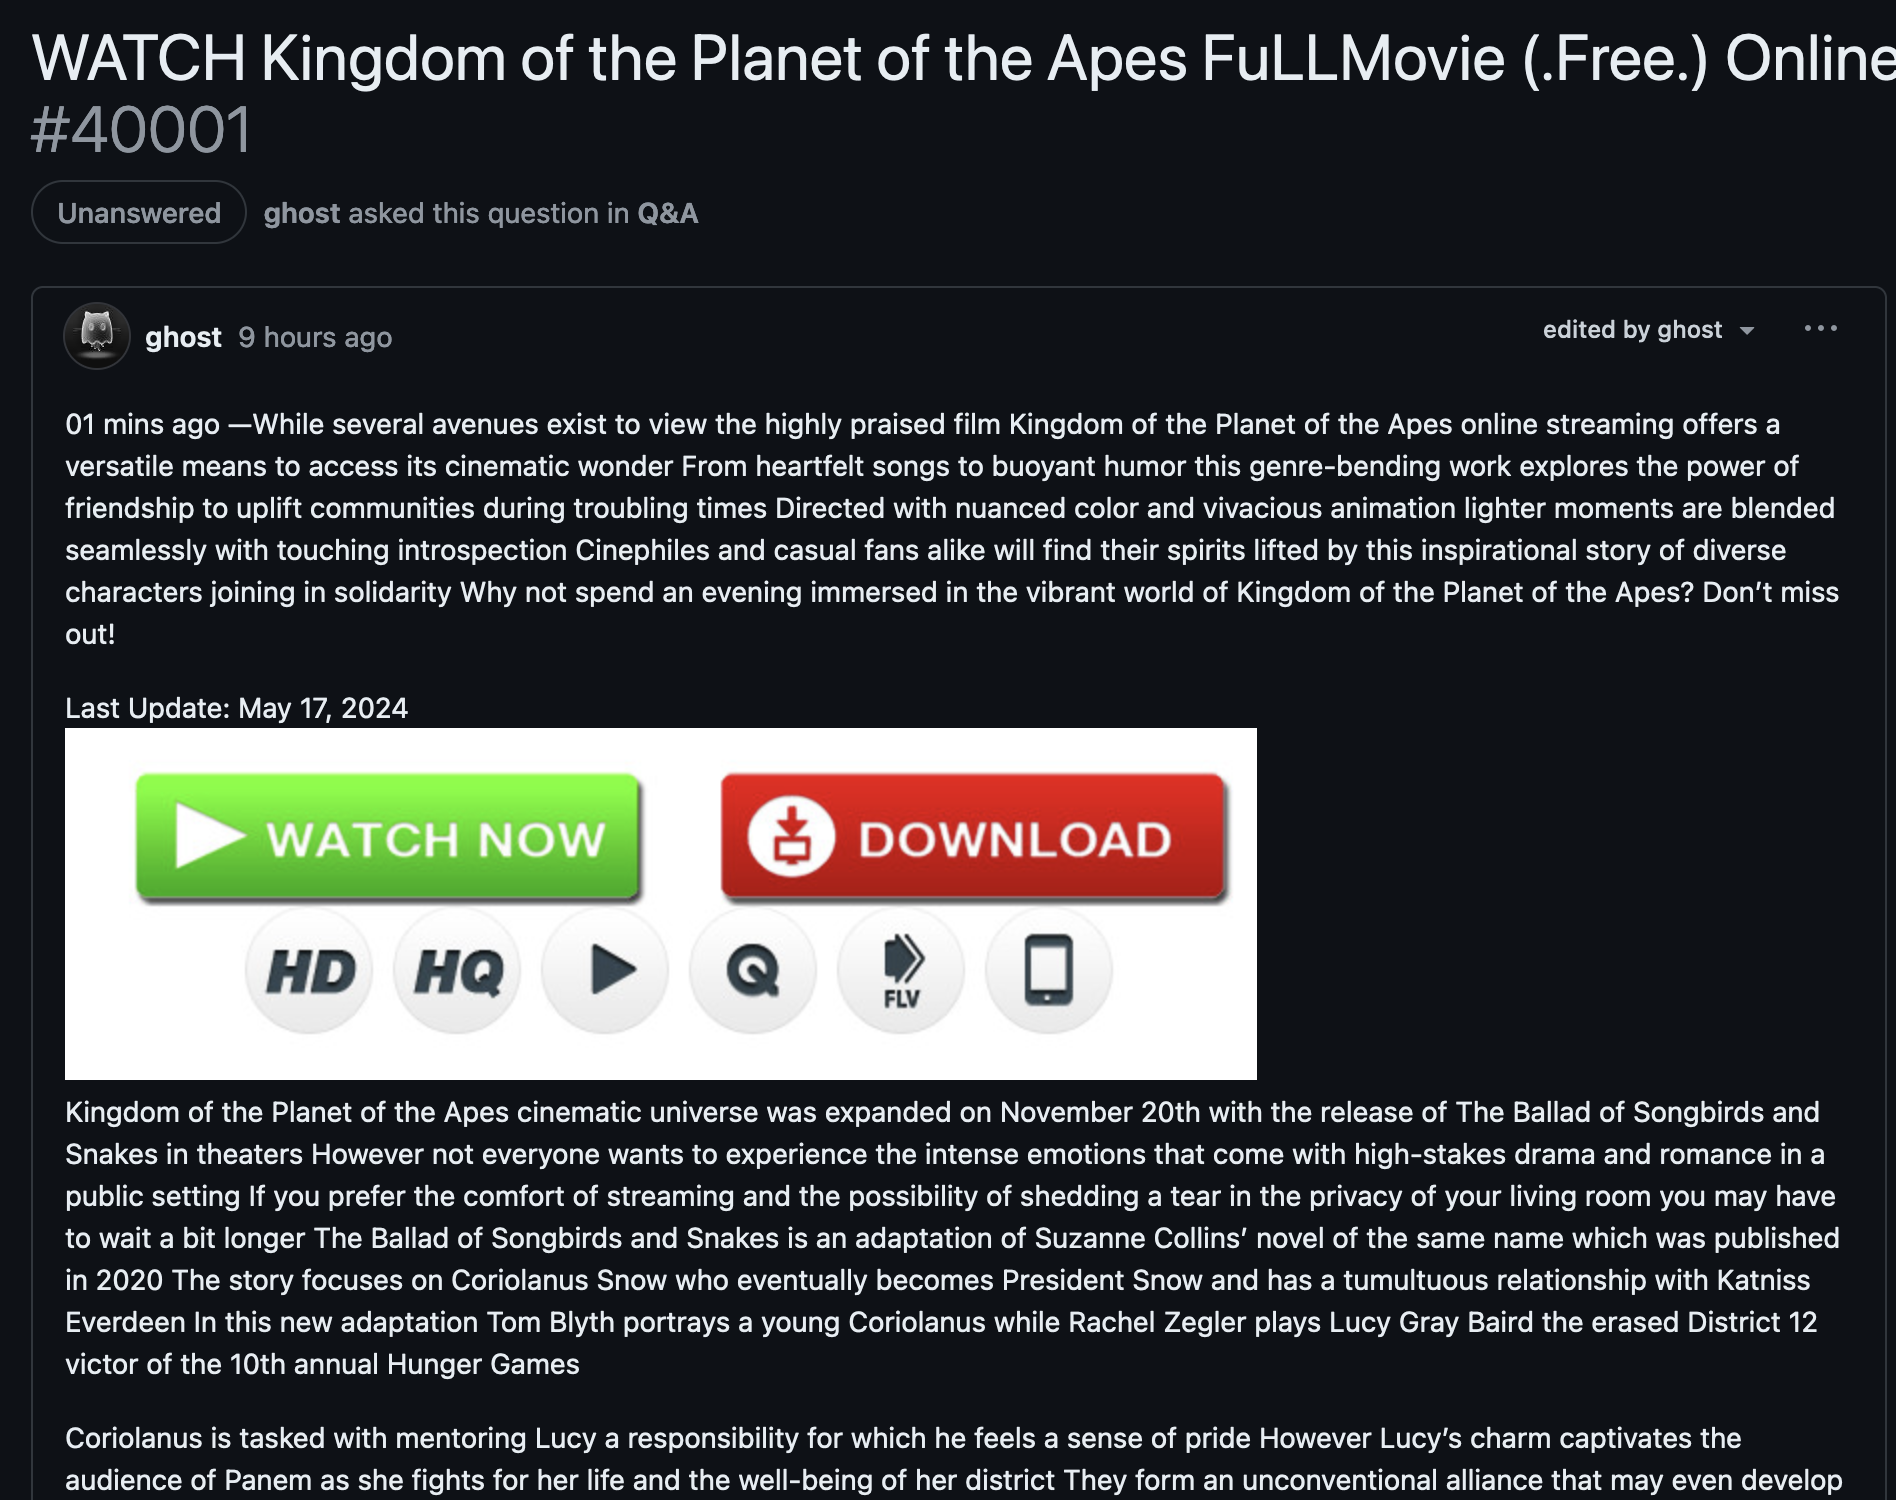 Screenshot of the GitHub interface showing a spam GitHub discussion with 'WATCH Kingdom of the Planet of the Apes FuLLMovie (.Free.)...' title, and a content matching this title, with big 'Watch now' and 'Download' buttons